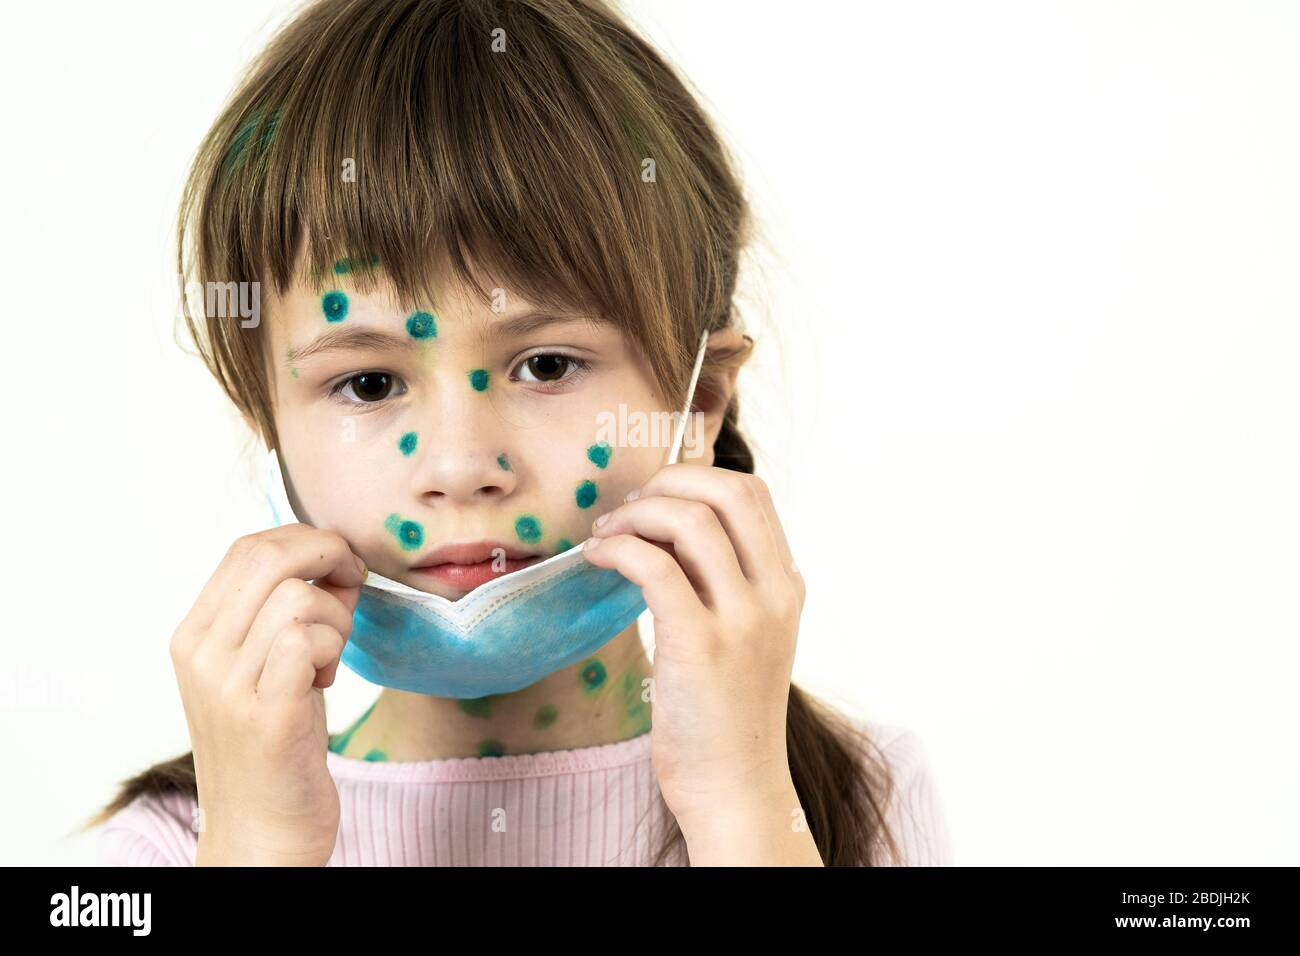 Child girl wearing blue protective medical mask ill with chickenpox, measles or rubella virus with rashes on body. Children protection during epidemic Stock Photo